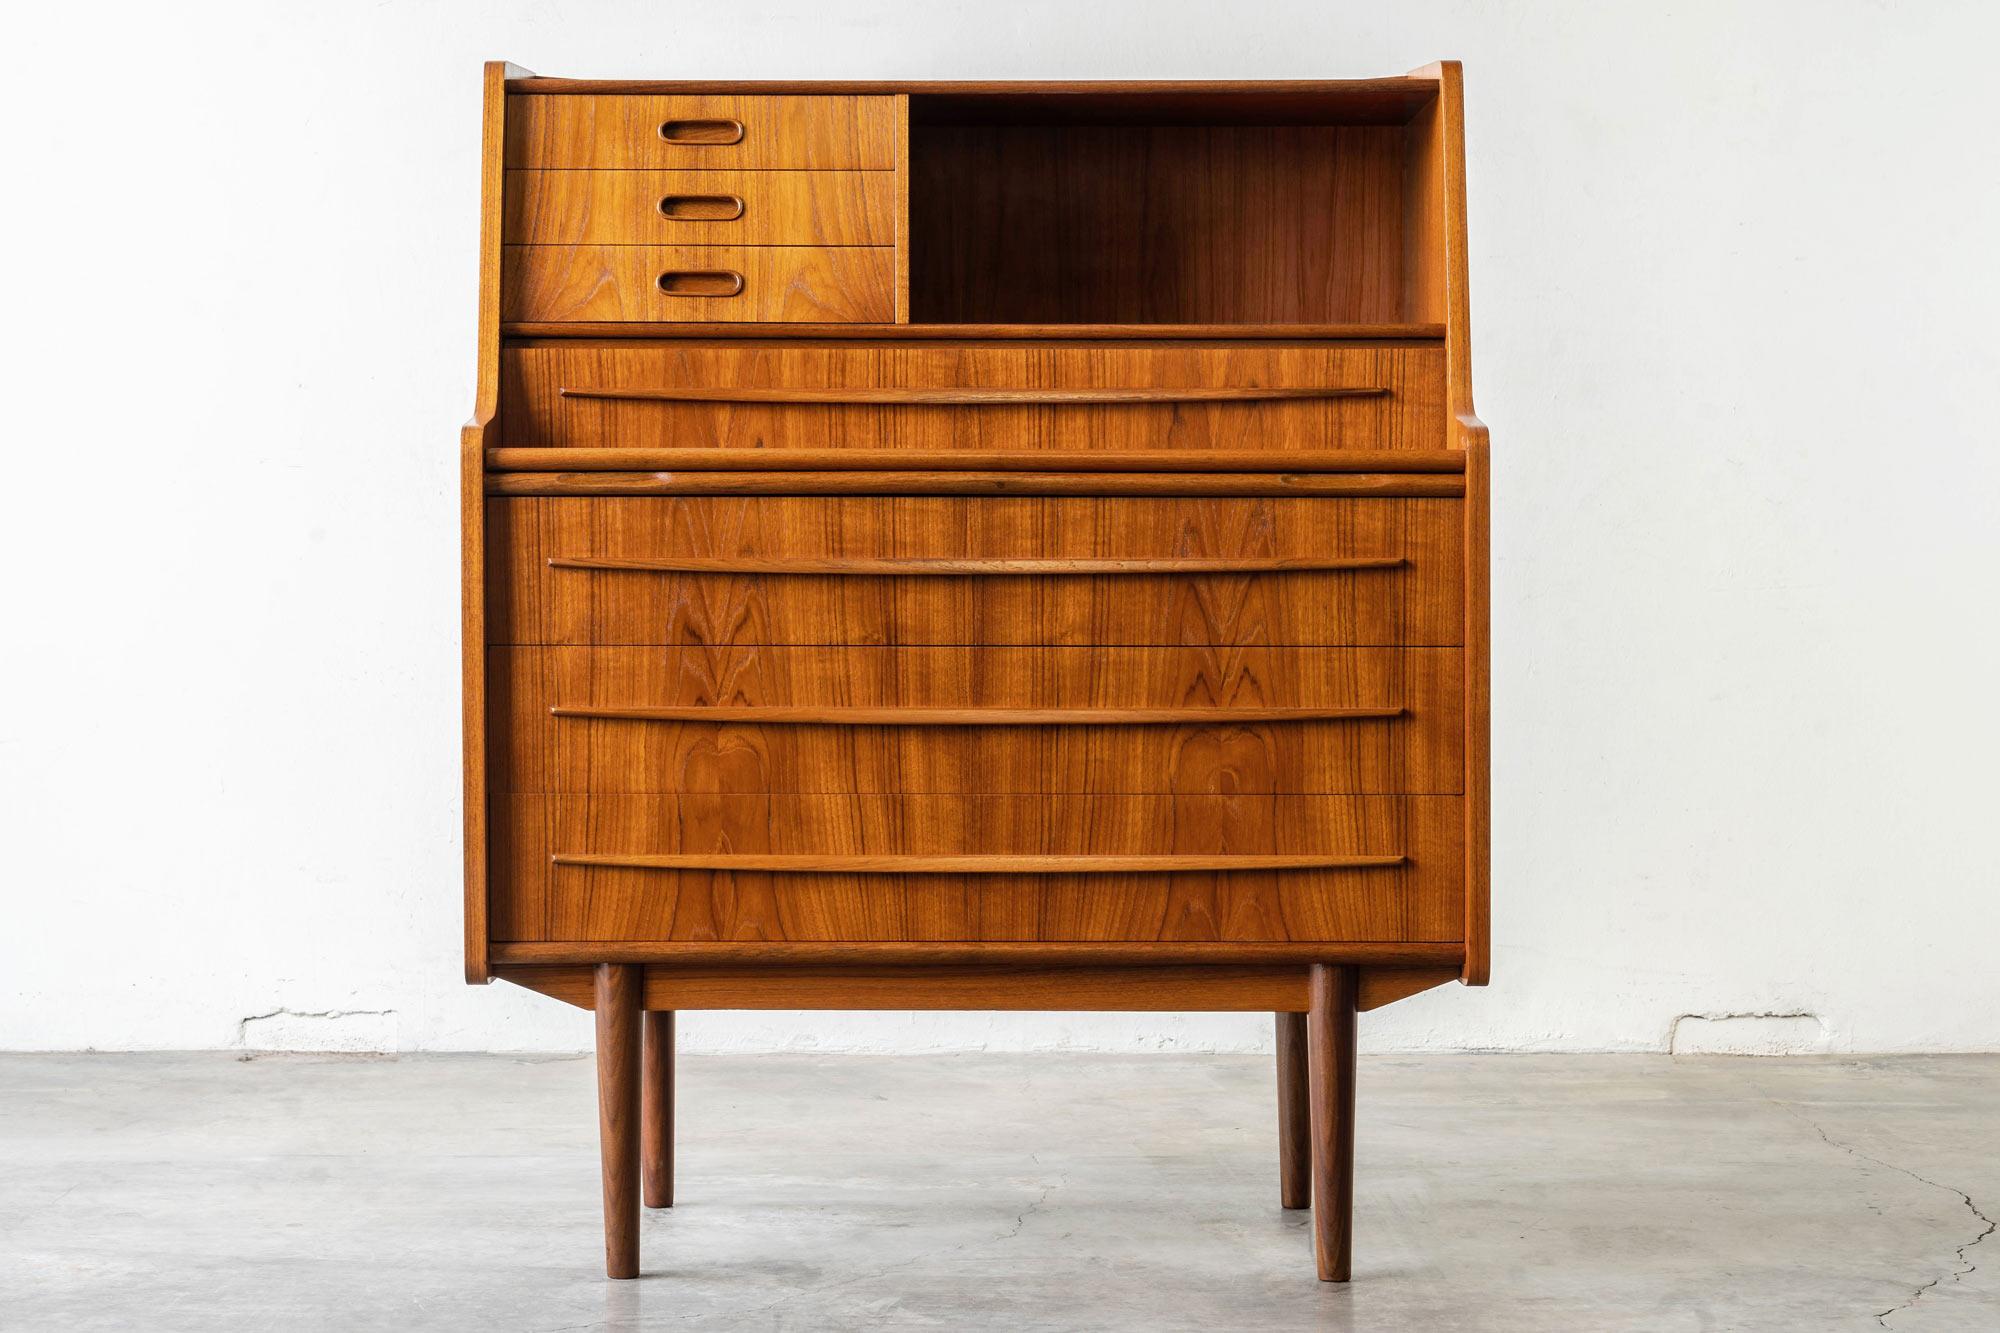 This incredible Danish modern teak vanity secretary desk hails straight from the 1960s. Manufactured by Gunnar Falsig.

Features:

• Beautiful, insane, rich, teak wood-grain
• Pull out vanity with original robin's egg blue interior and